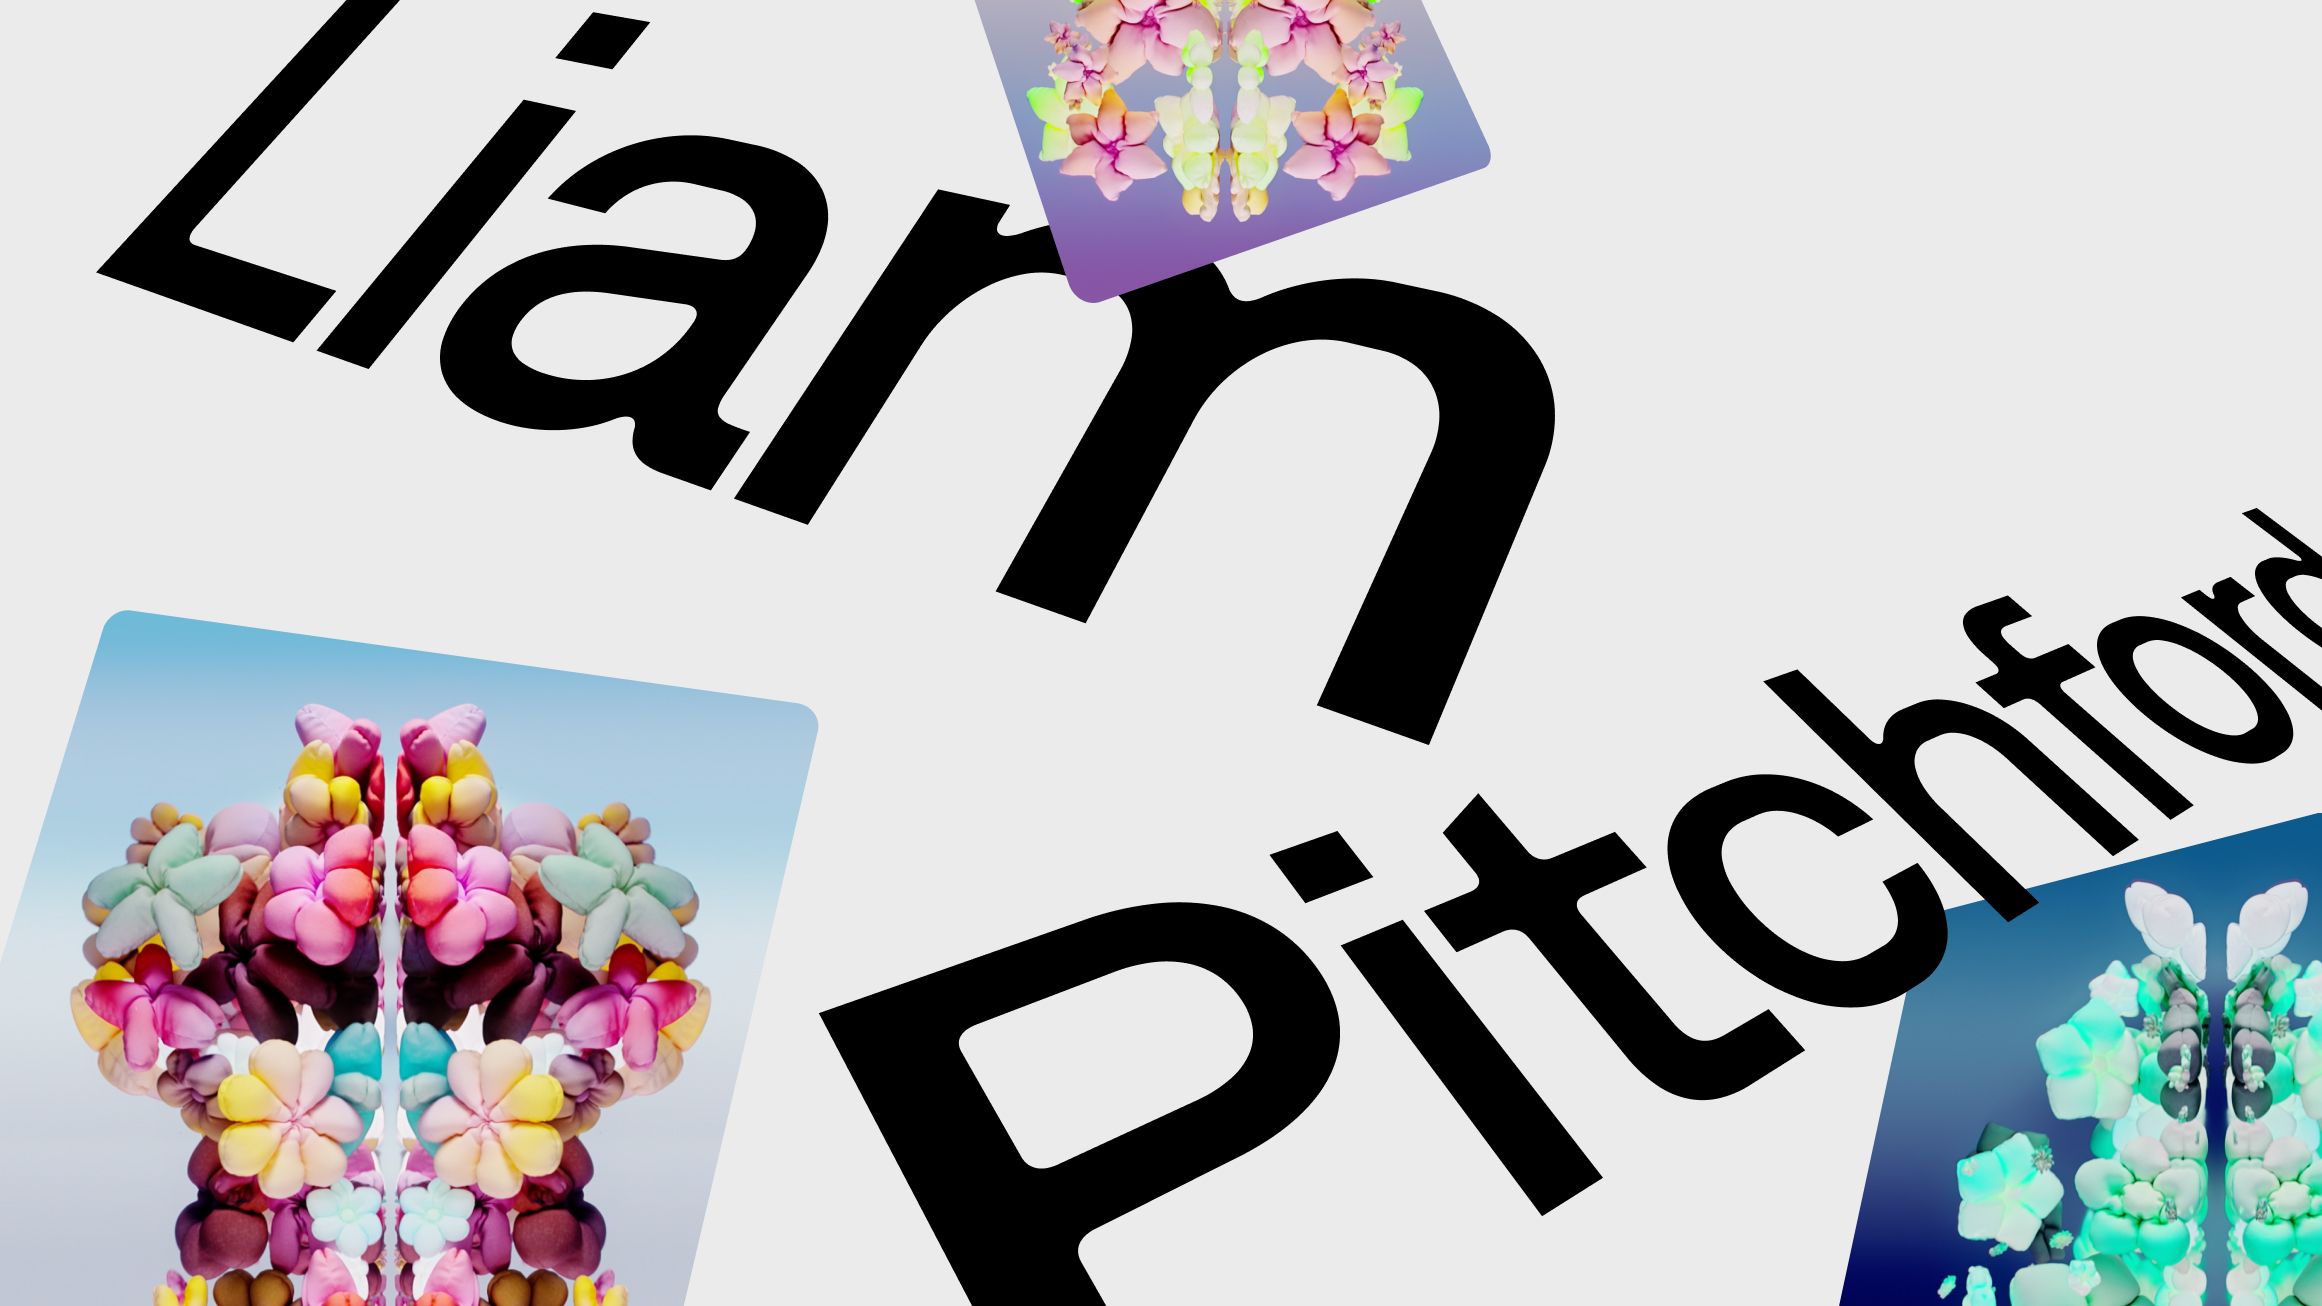 Graphic key brand visual showing Liam Pitchford's work